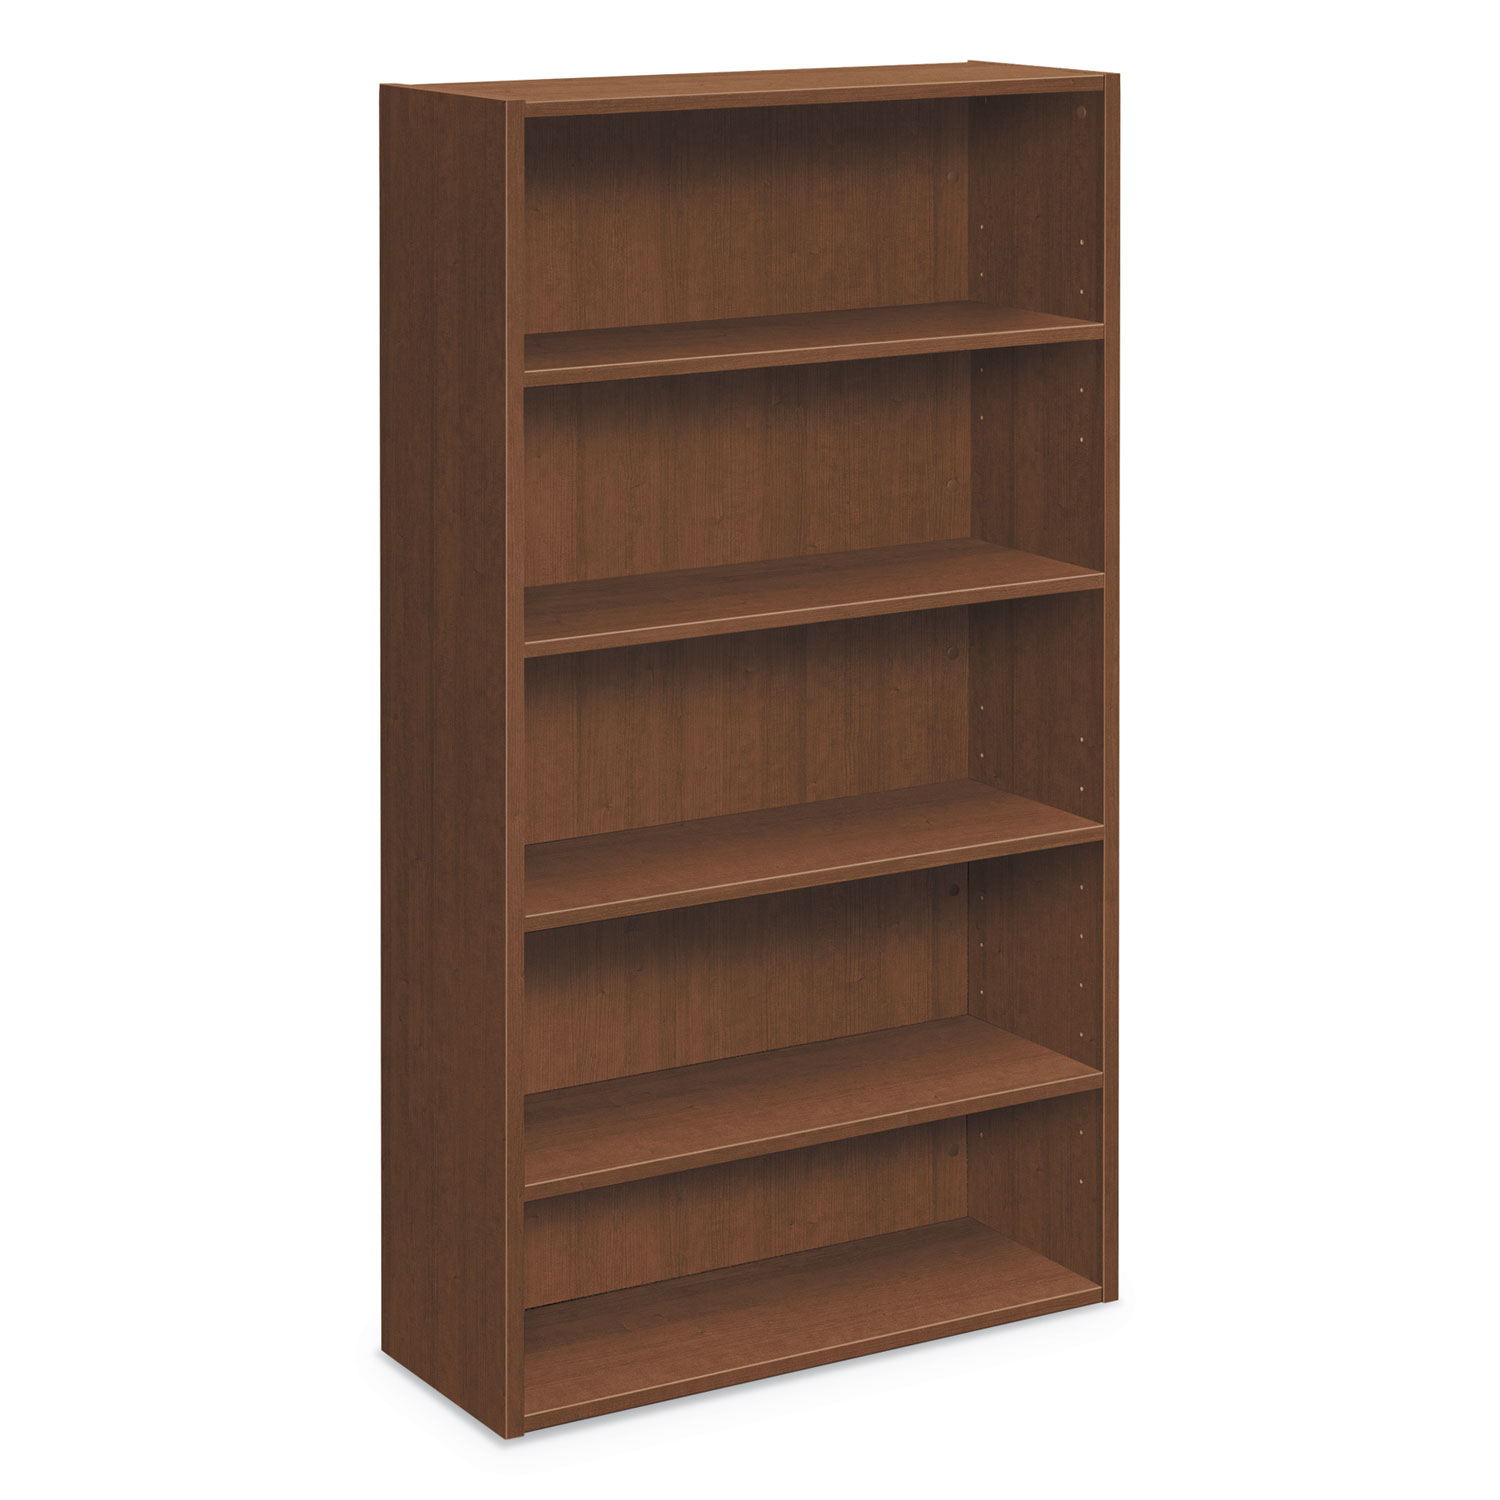 Foundation Bookcases, 32.06w x 13.81d x 65.38h, Shaker Cherry